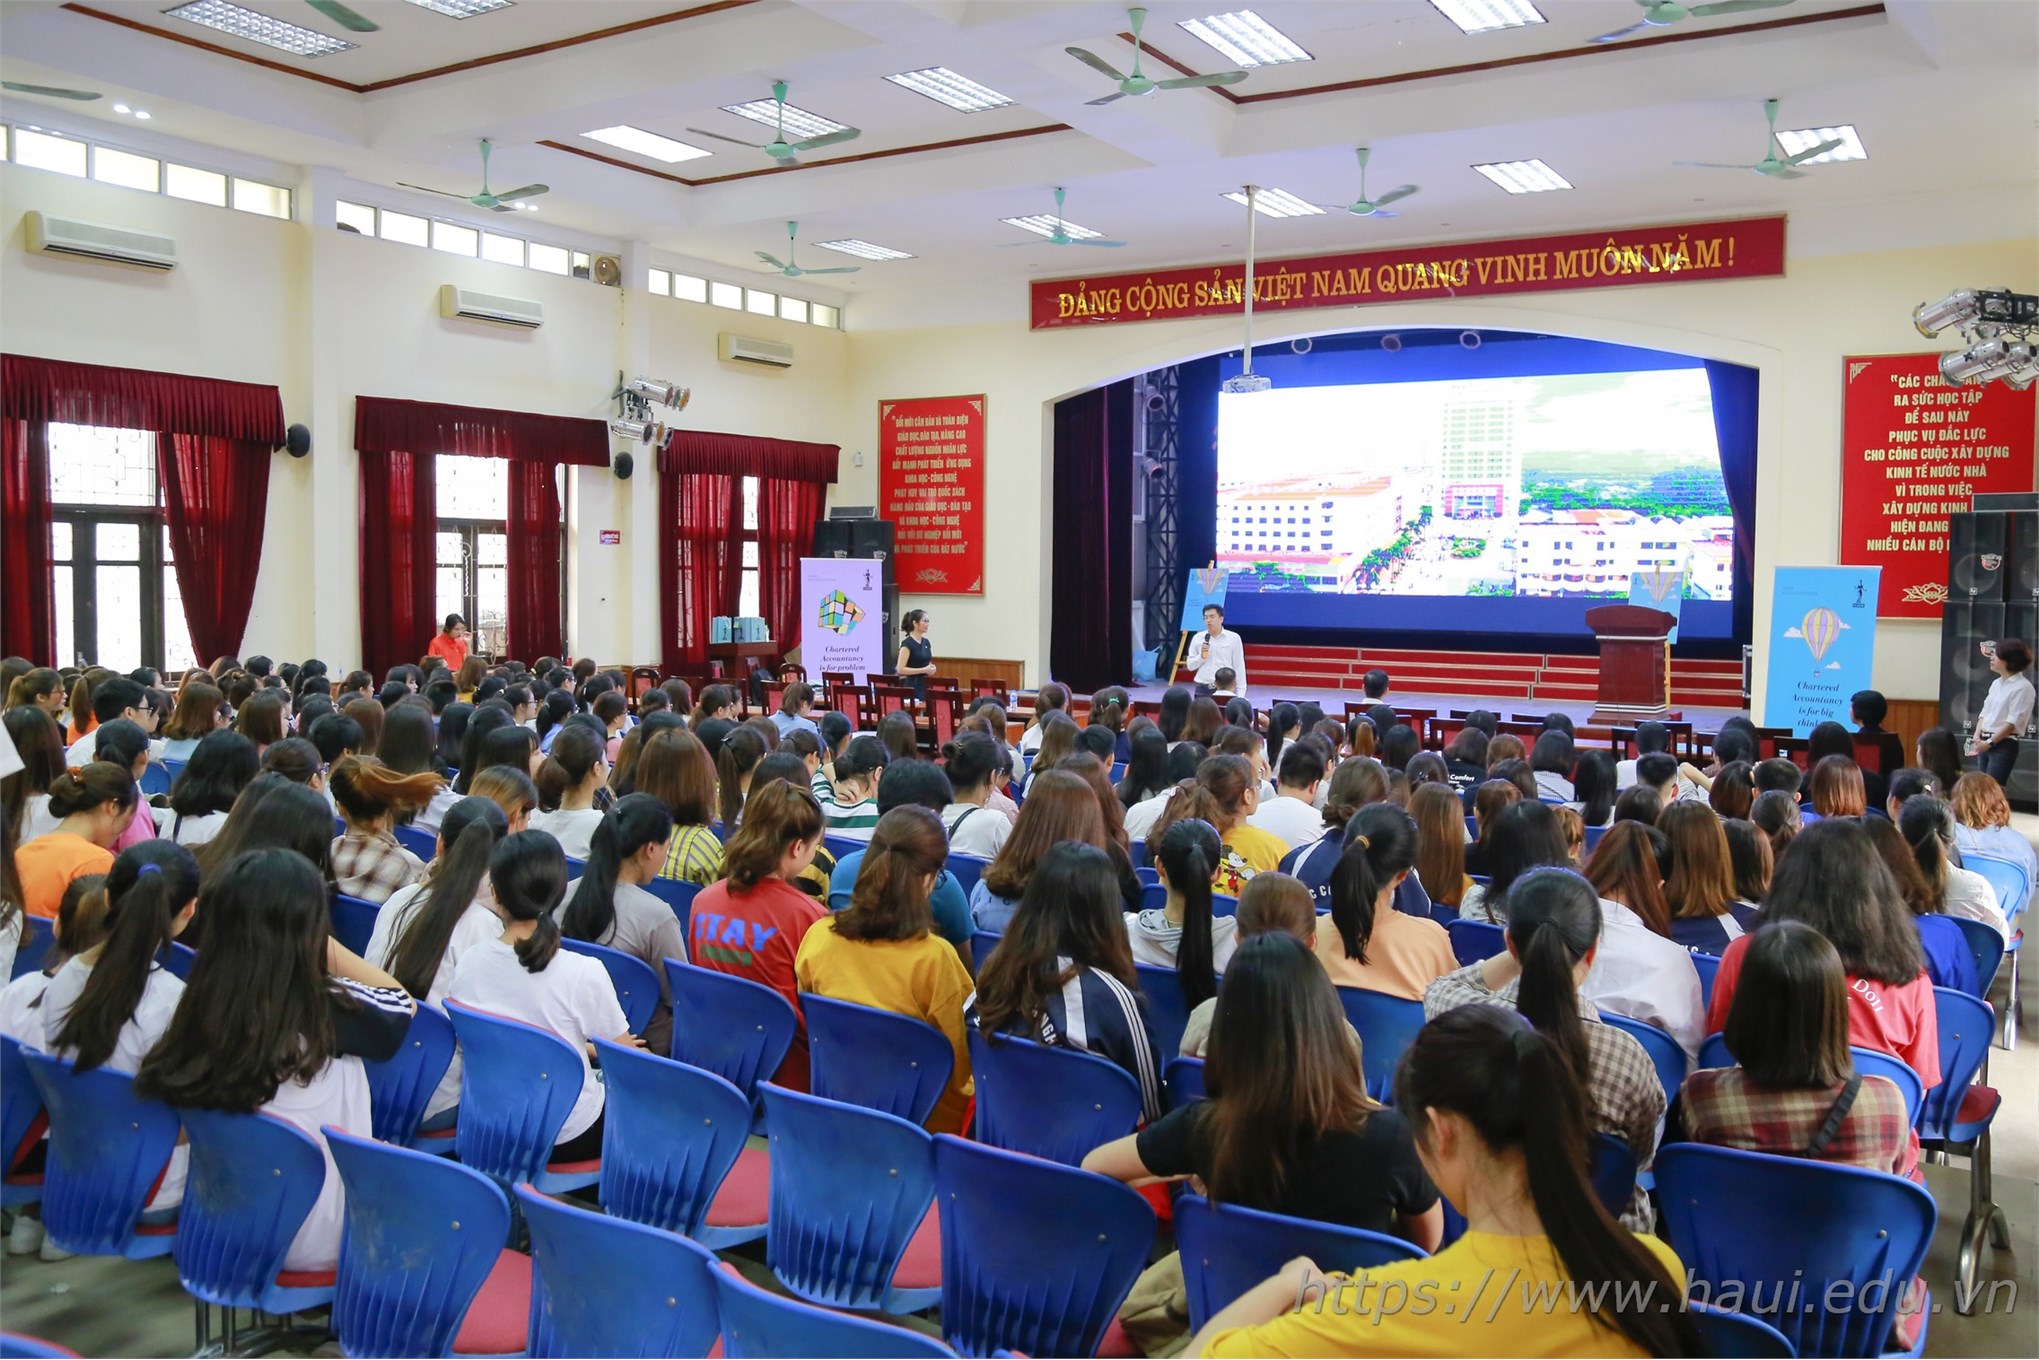 Career Orientation Conference for Accounting and Auditing students